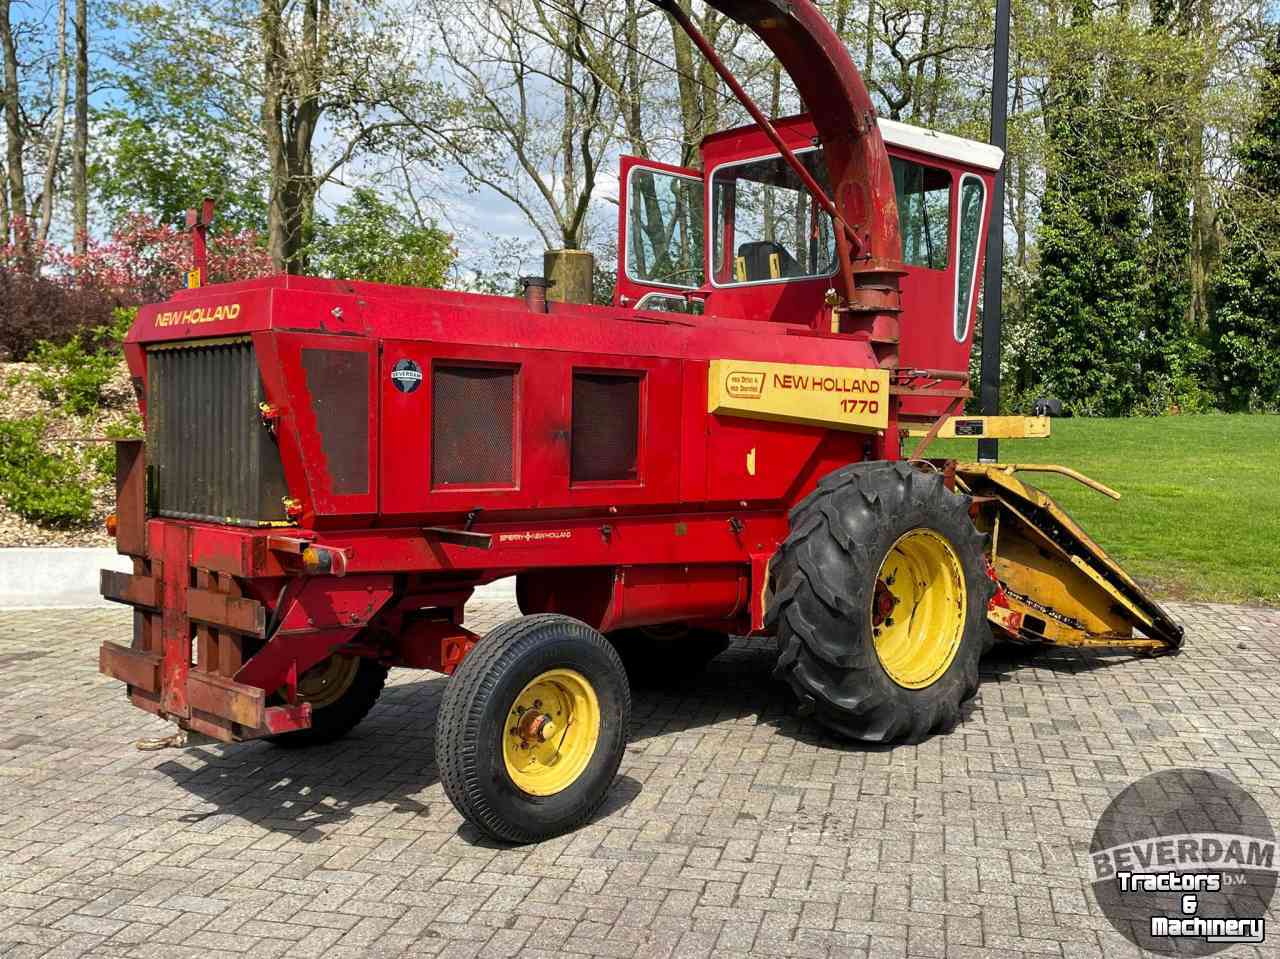 Ensileuse automotrice New Holland 1770